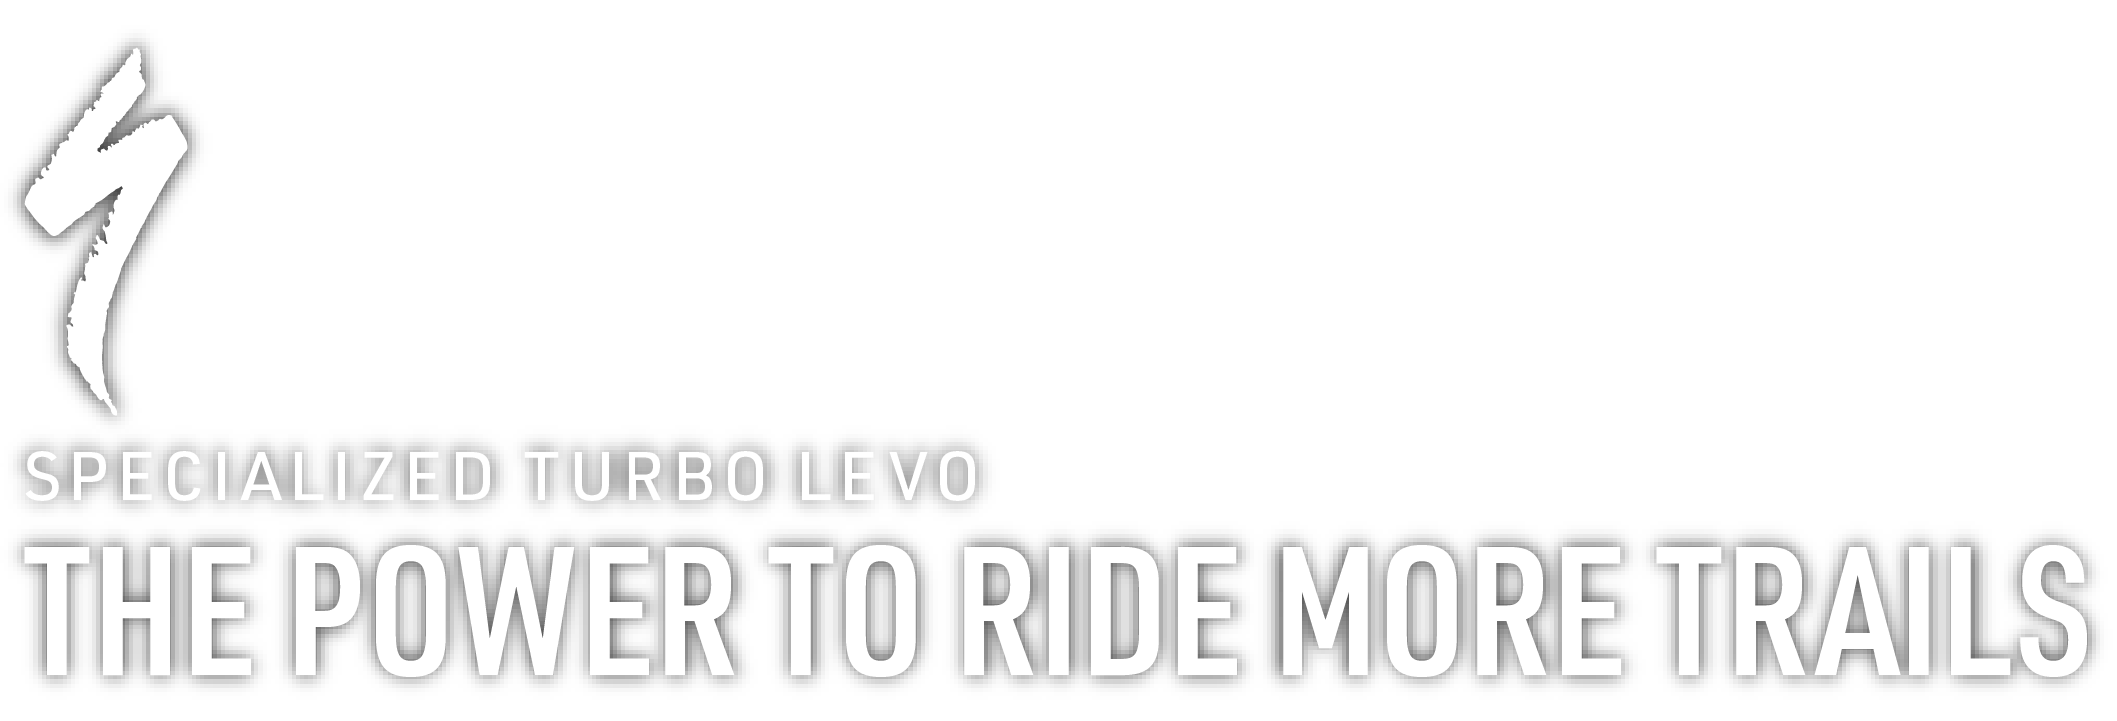 Specialized Turbo Levo | The Power To Ride More Trails